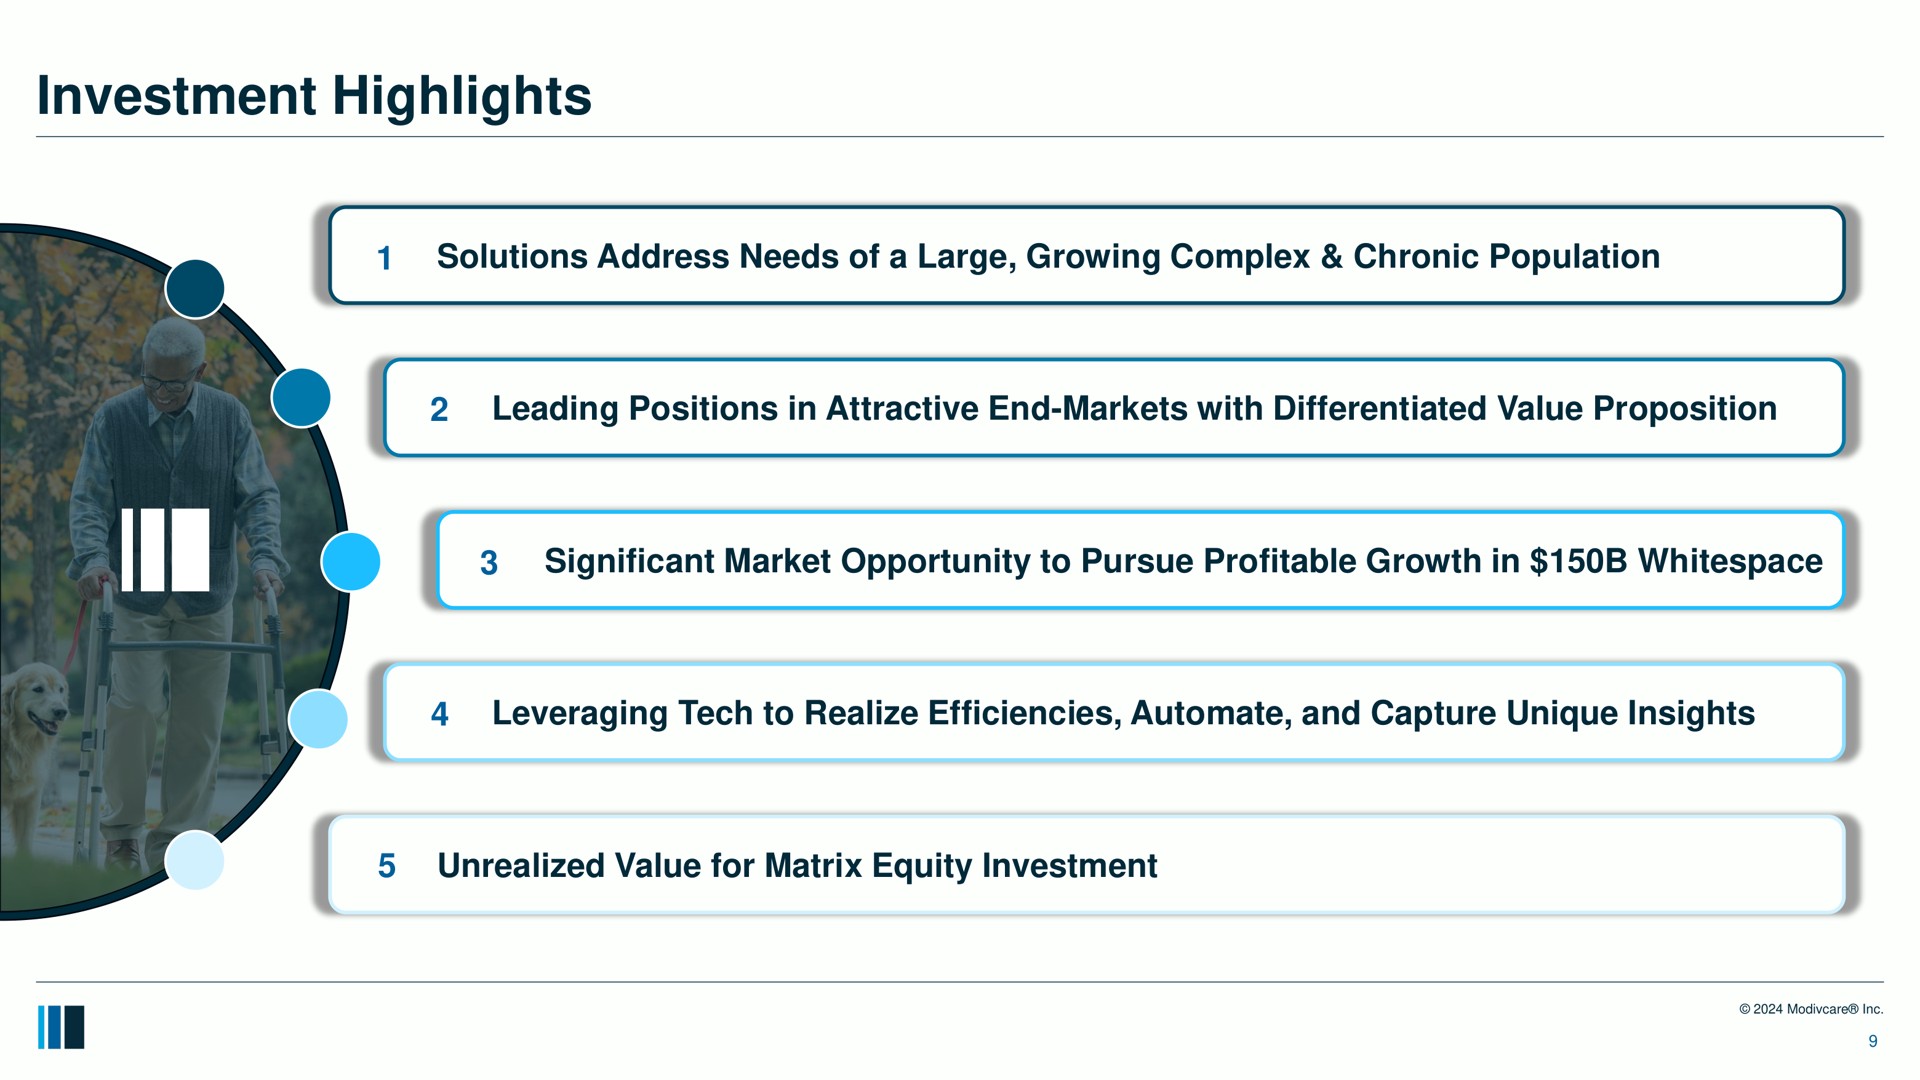 investment highlights solutions address needs of a large growing complex chronic population leading positions in attractive end markets with differentiated value proposition significant market opportunity to pursue profitable growth in leveraging tech to realize efficiencies and capture unique insights unrealized value for matrix equity | ModivCare